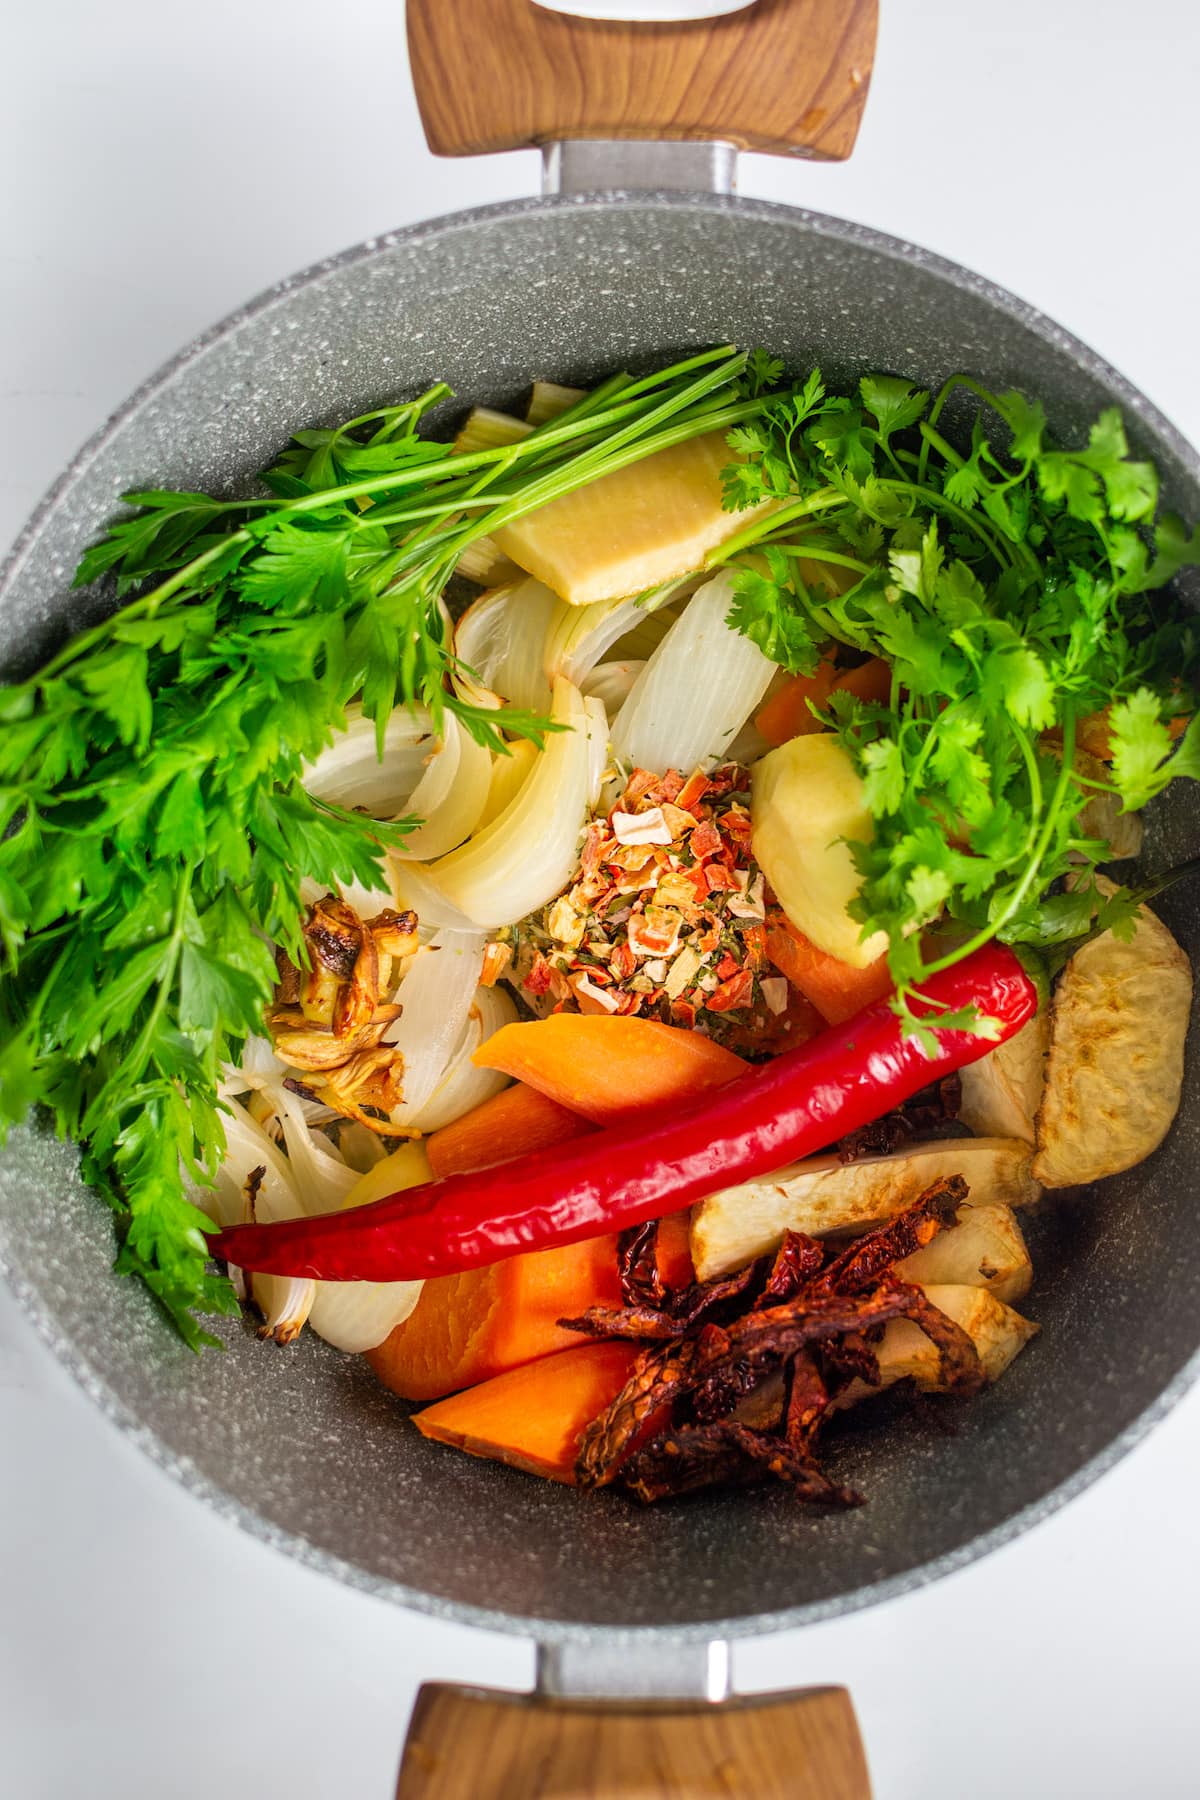 Top view of raw vegetables and spices in a sauce pan.